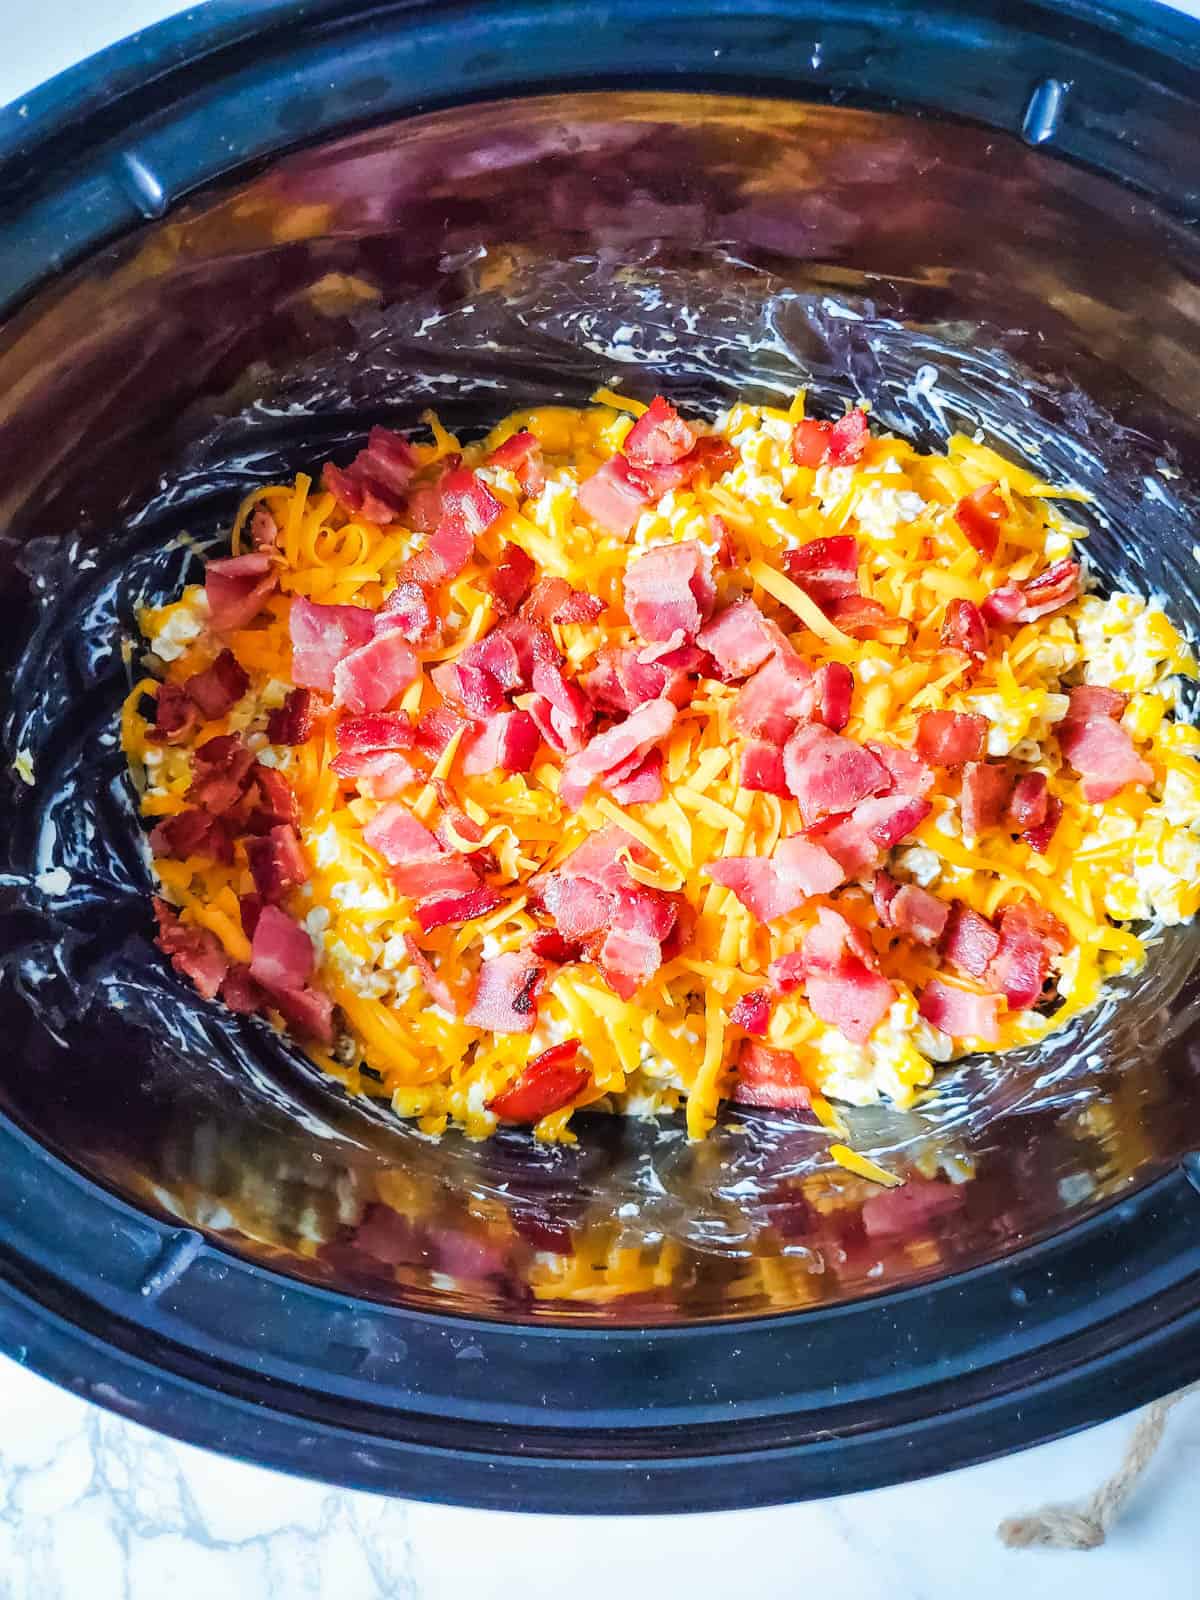 Bacon topped cheese and corn in a crockpot.